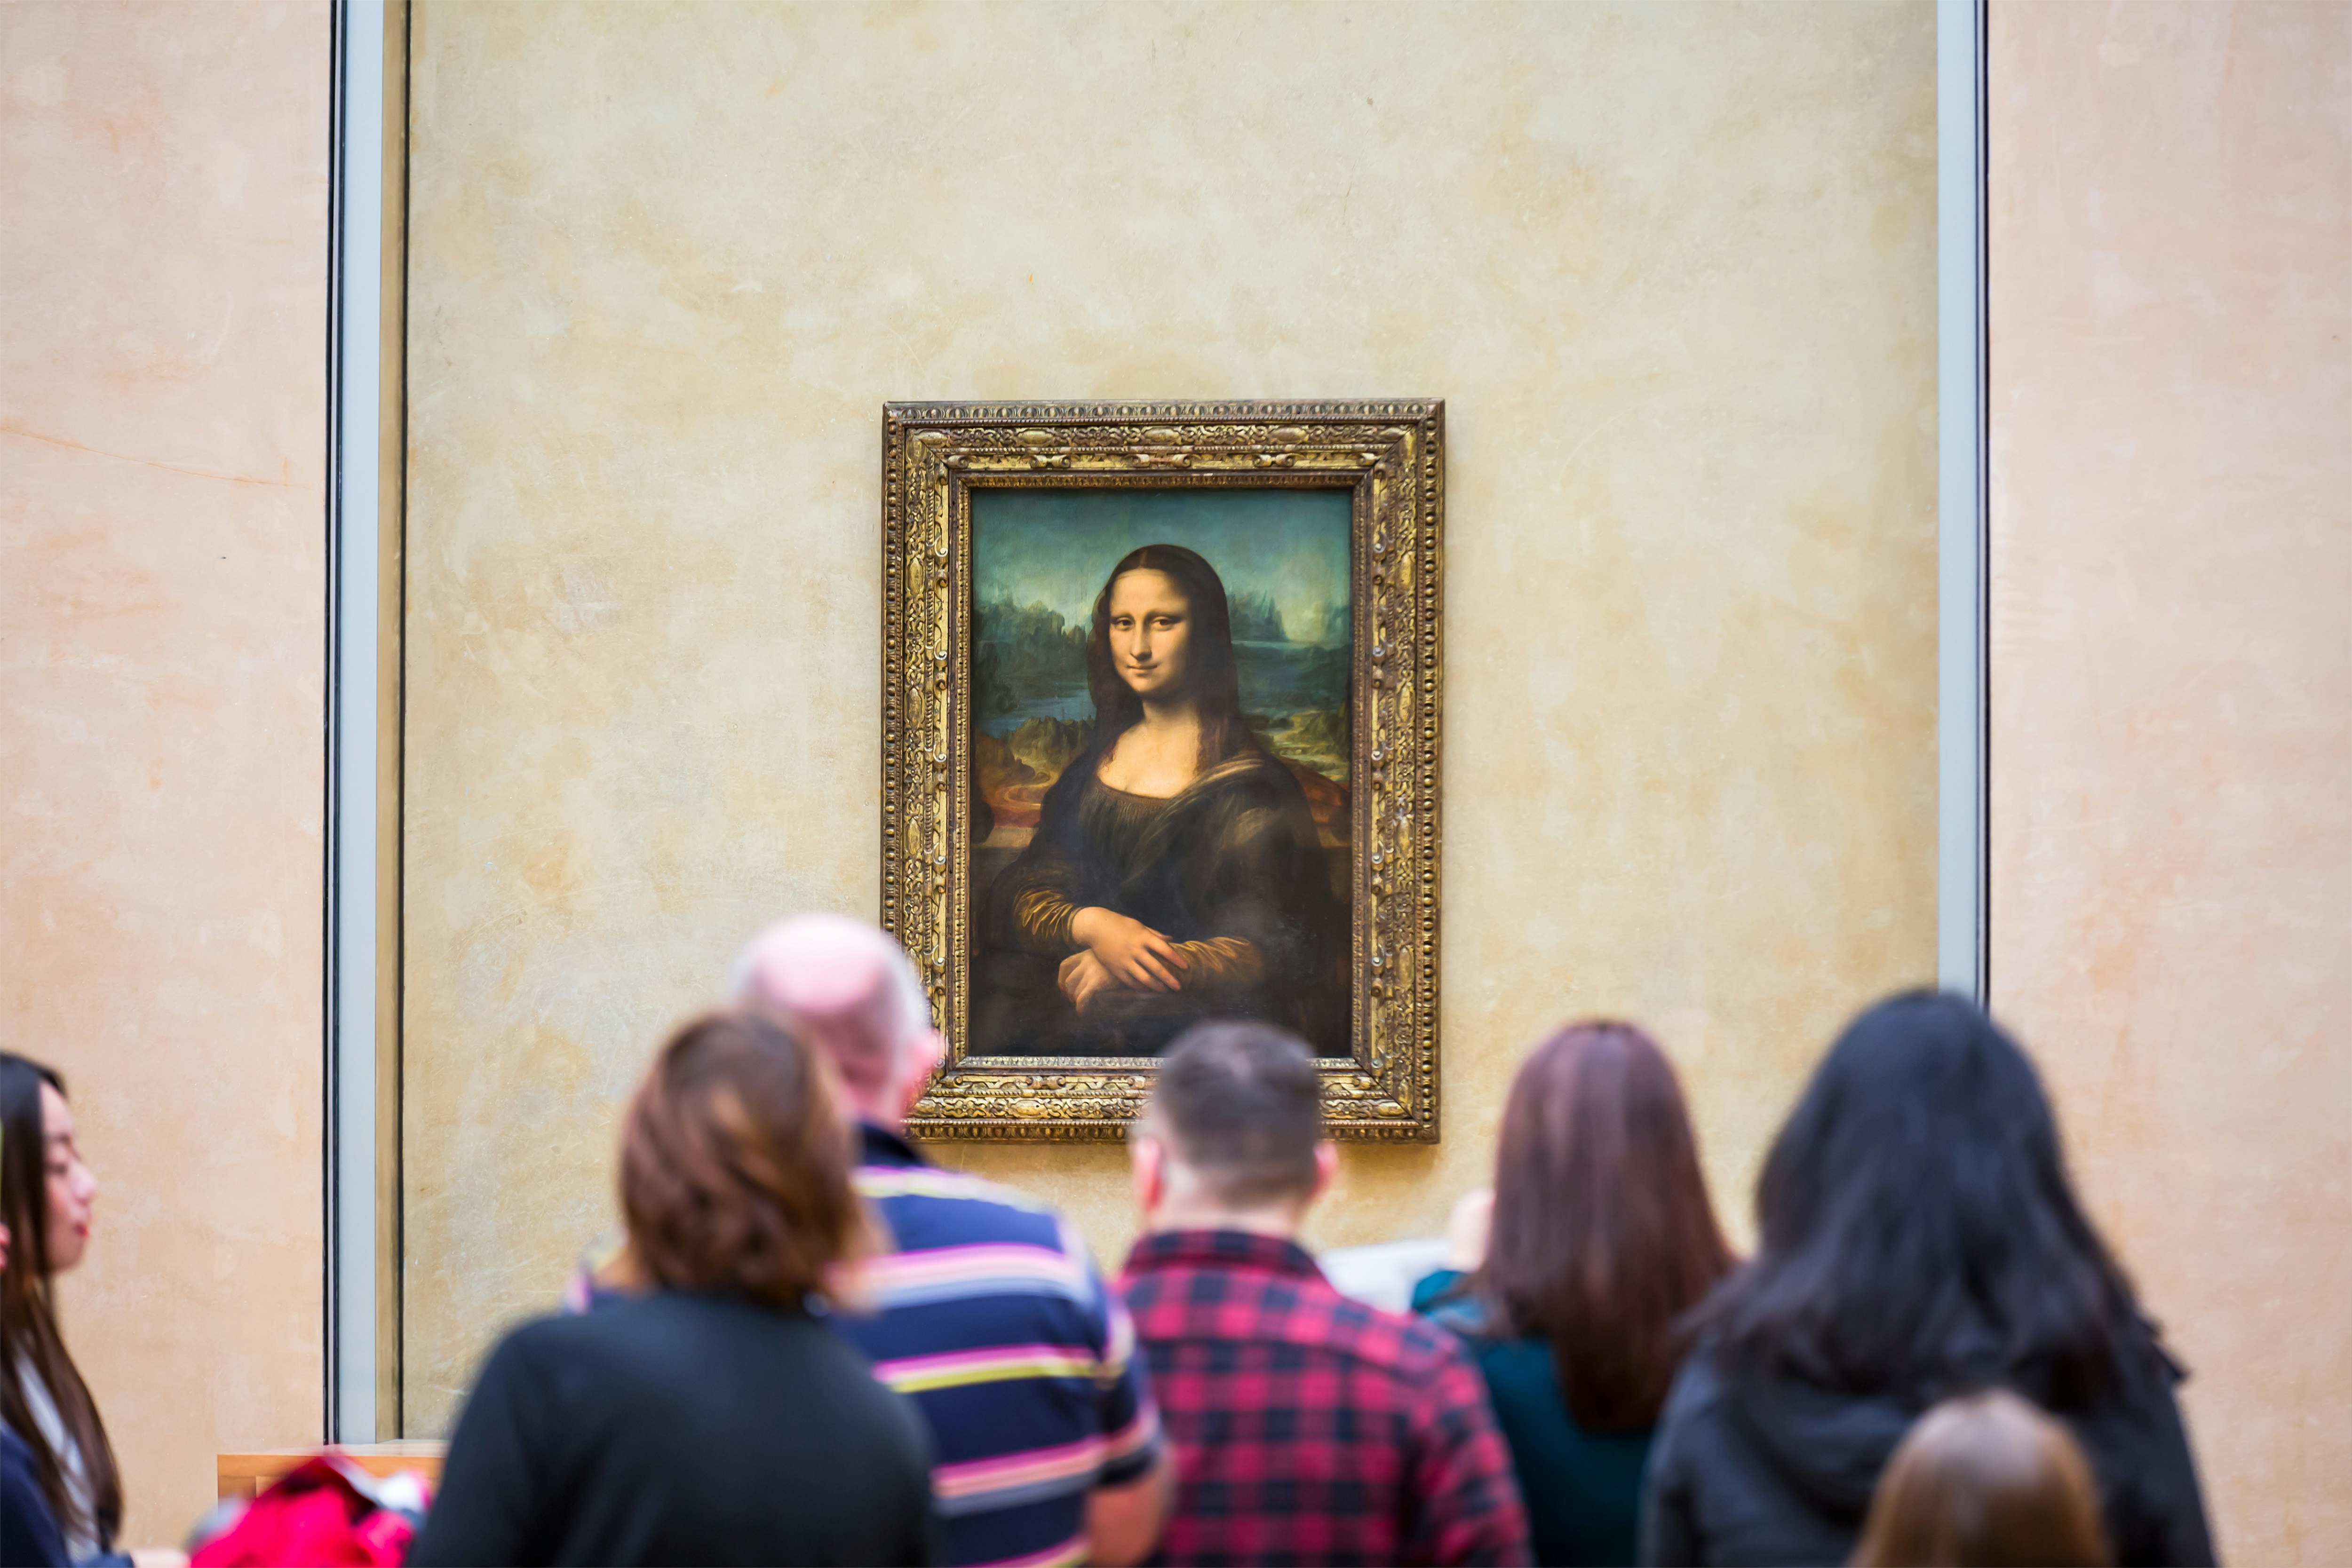  crowd of visitors in front of Leonardo DaVinci's Mona Lisa at the Louvre Museum.